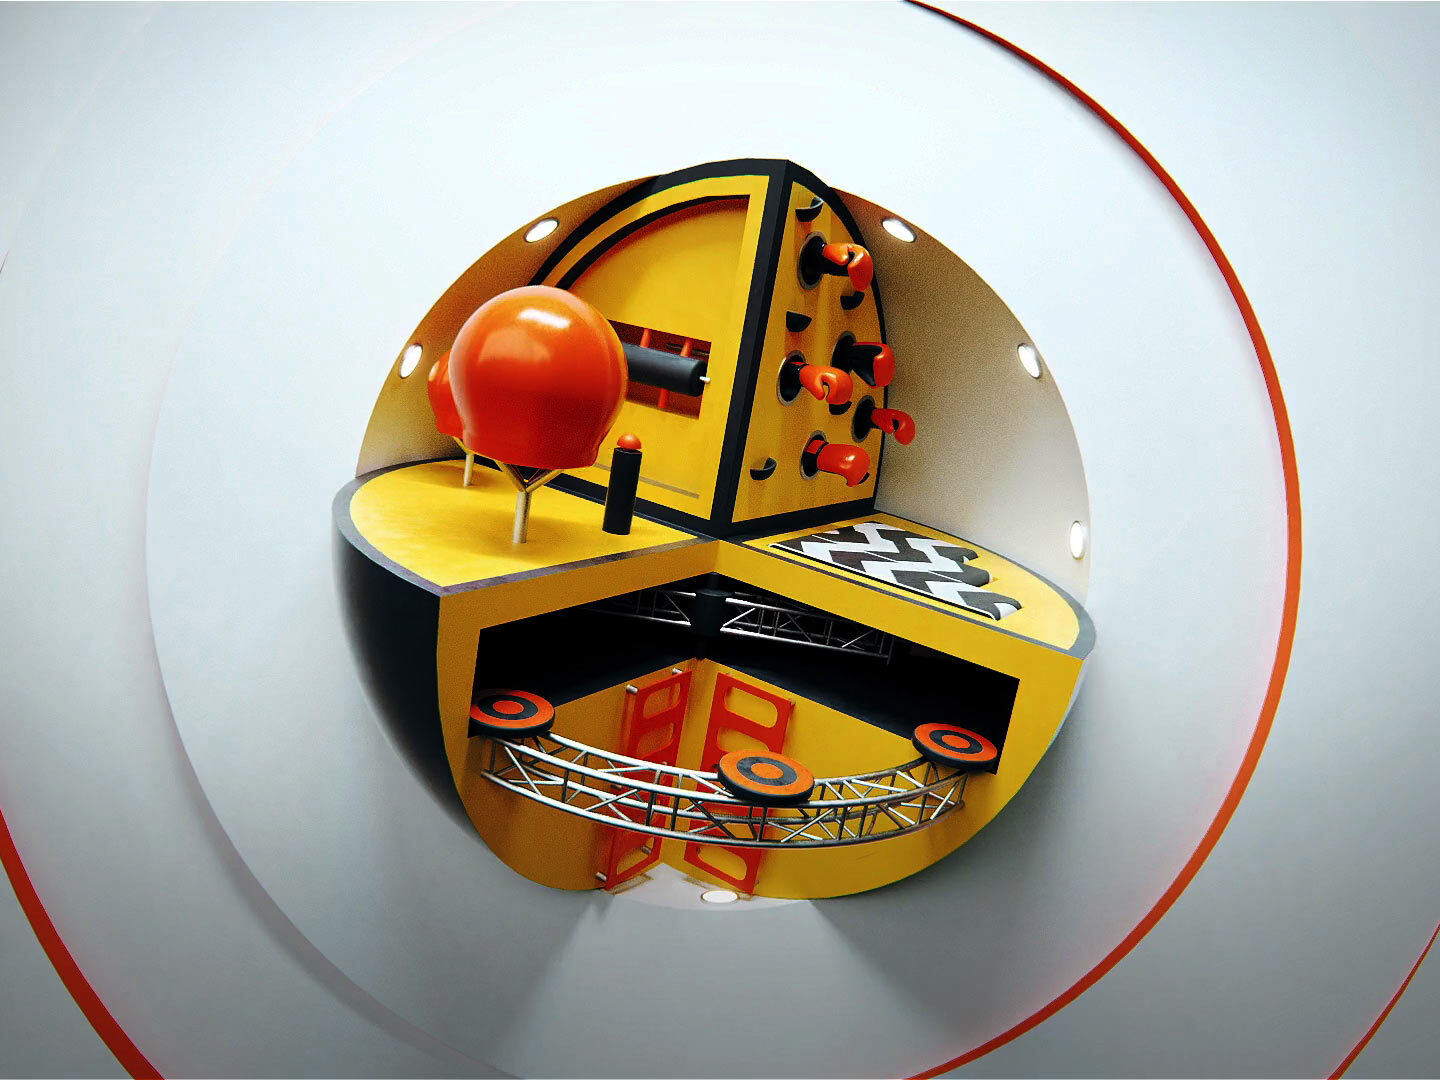 Clean shot of Challenge TV rebrand Ident with 3D rendered graphics displaying physical gameshows